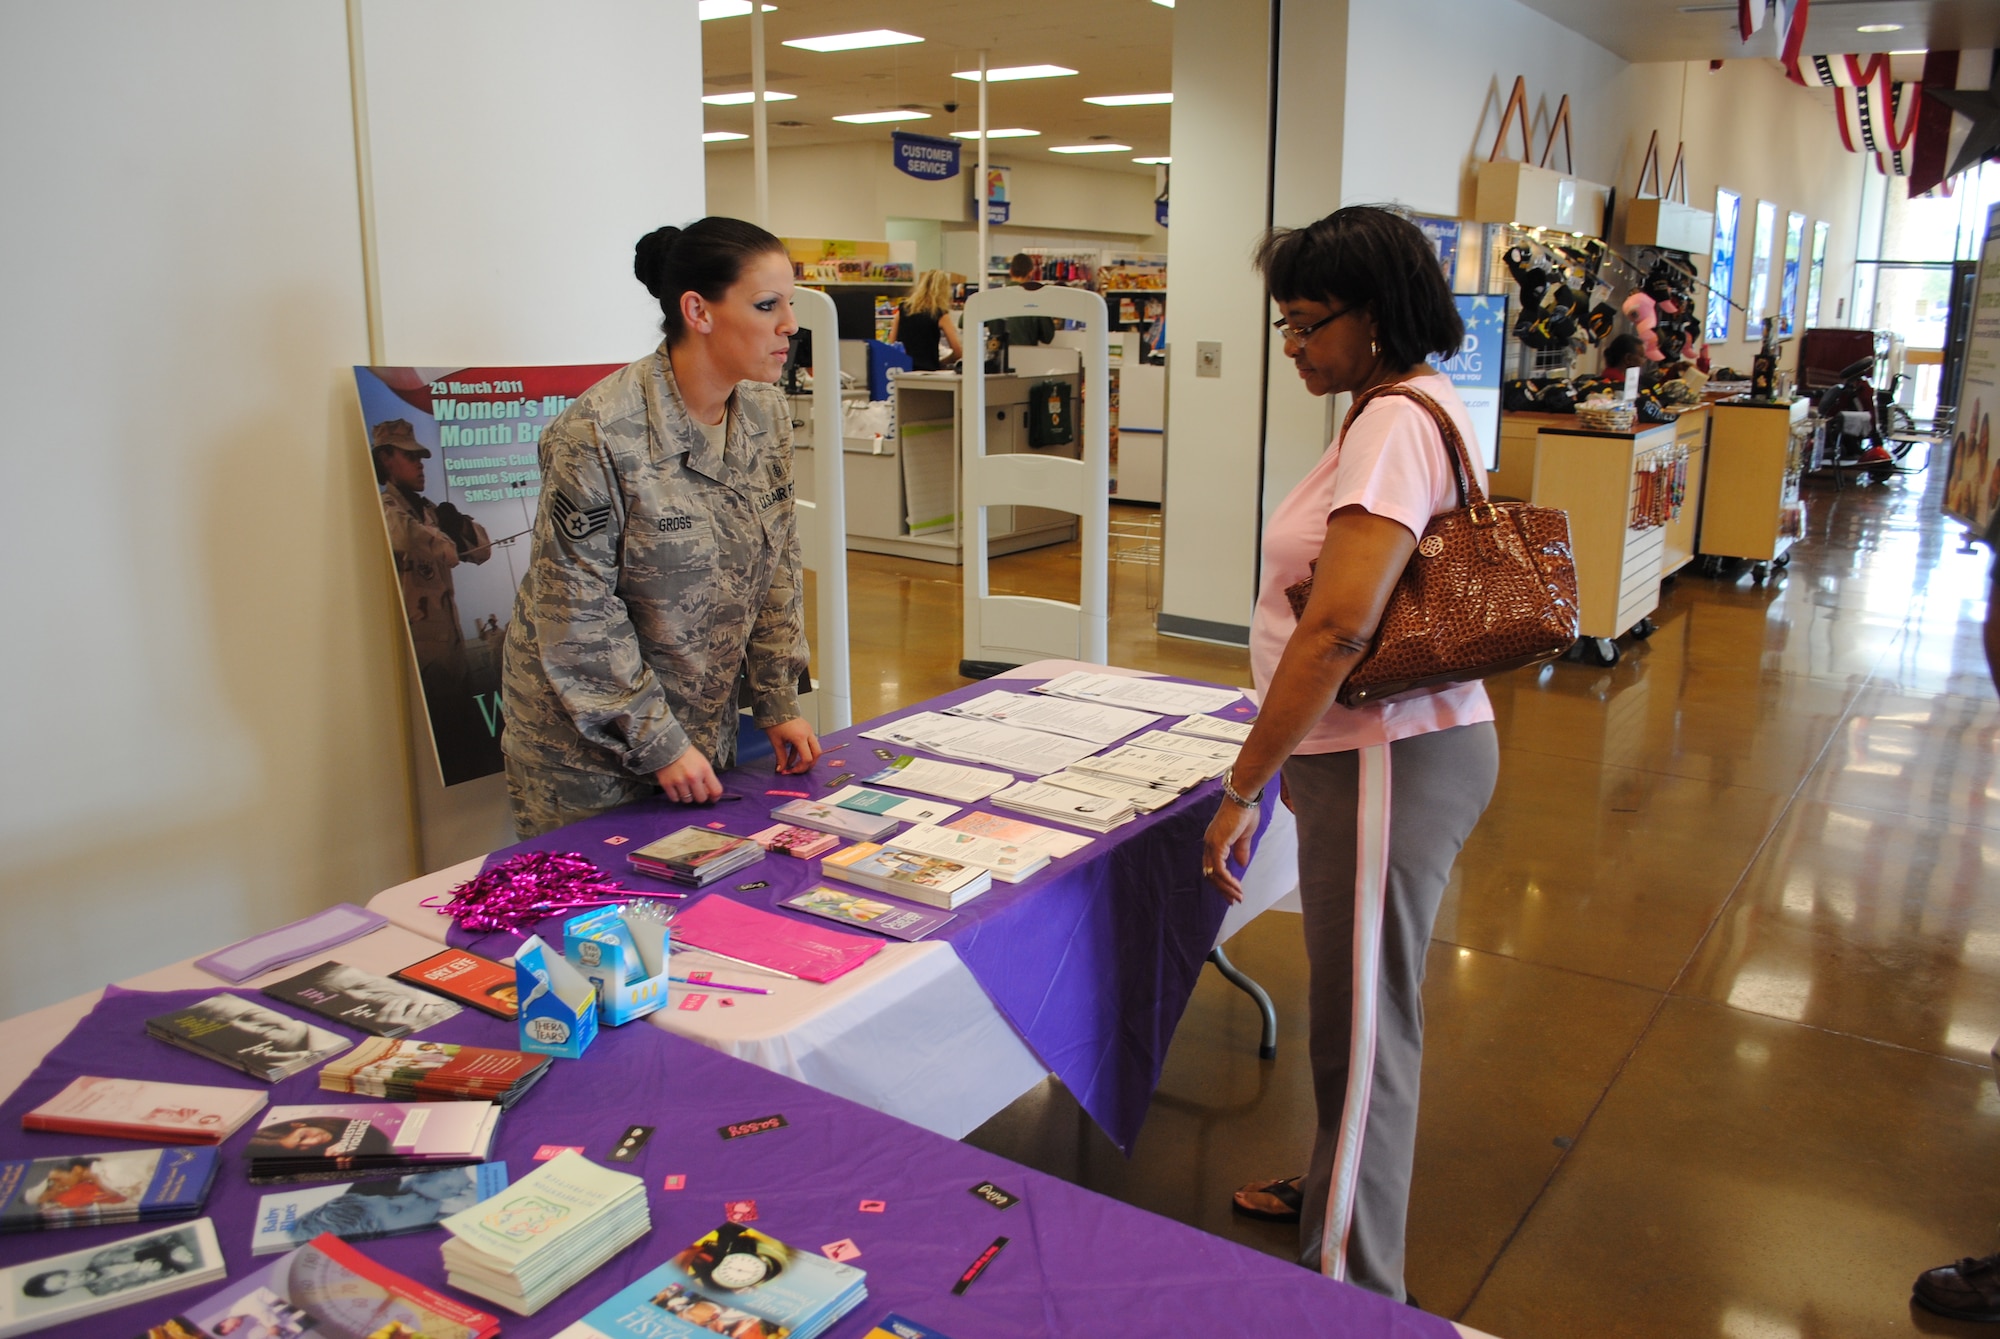 Staff Sgt. Ashley Gross, 14th Medical Group, helps an interested visitor at the information table during the second Women’s Health Fair at the base Exchange. Pamphlets and samples were available to help raise awareness about women’s health. (U.S. Air Force photo/2nd Lt. Brionna Ruff)